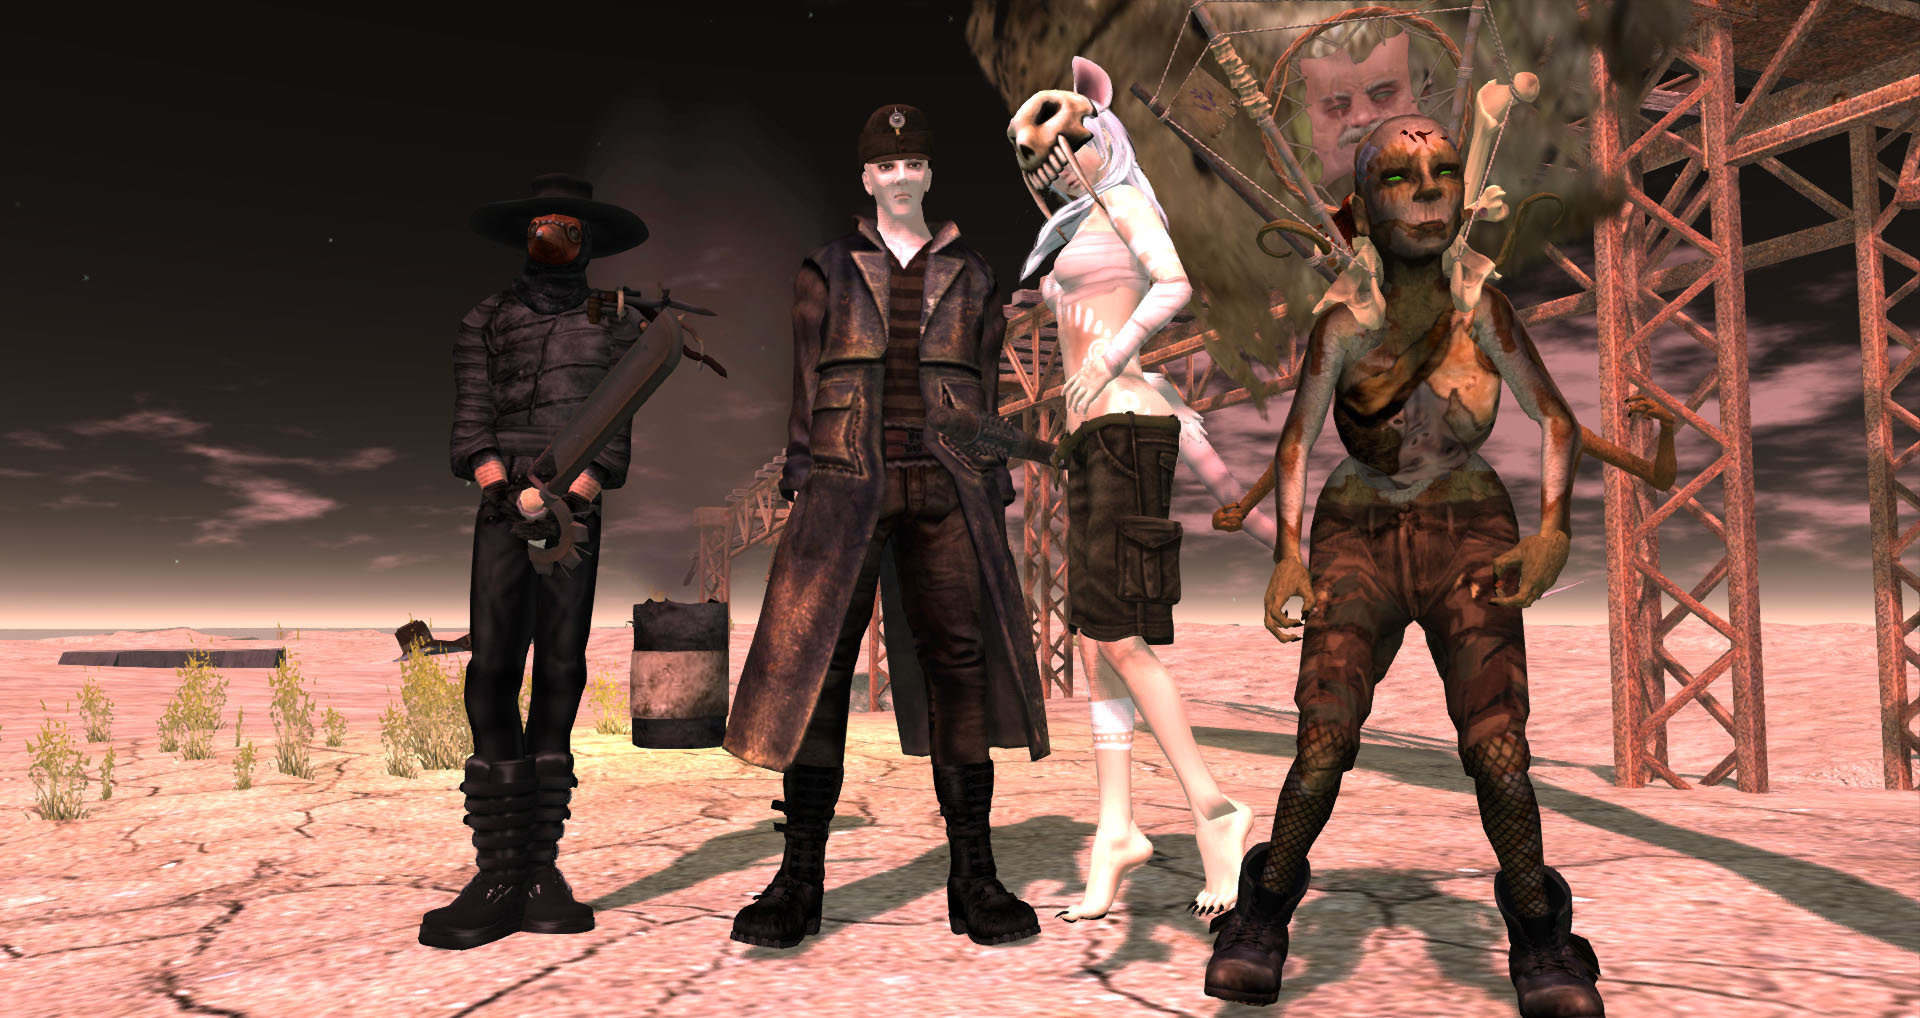 L to R: Michael Wexhome, Psycho Baroque, theblackcloud Oh, and somebody